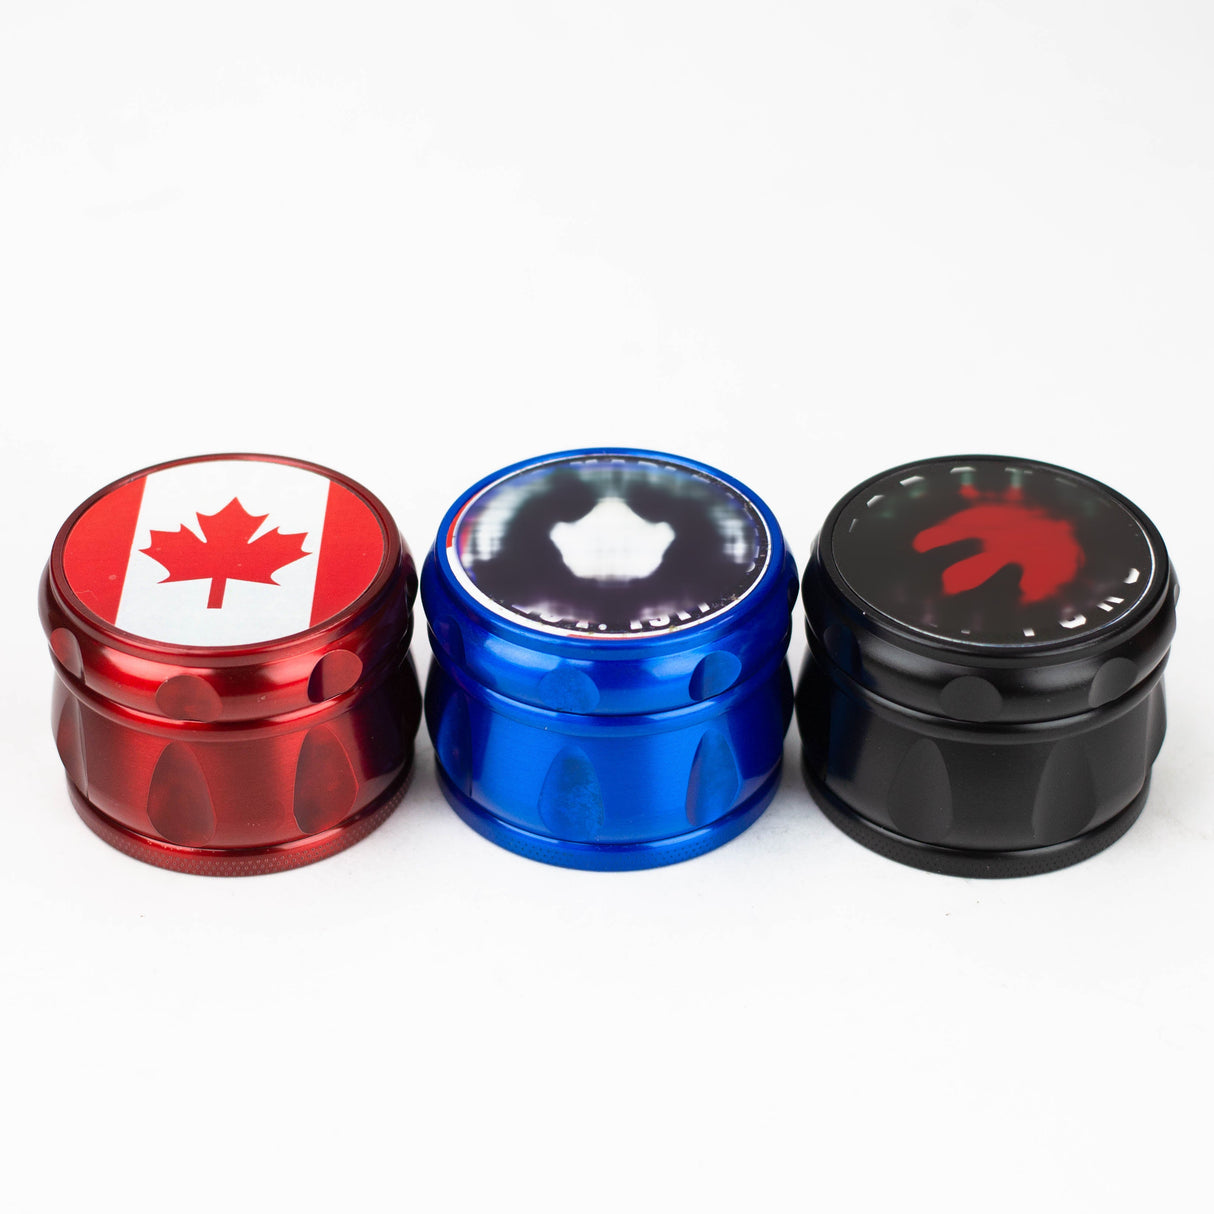 2.2" Drum Shape Canada Metal Grinder 4 Layers Box of 6 [GZ6271]